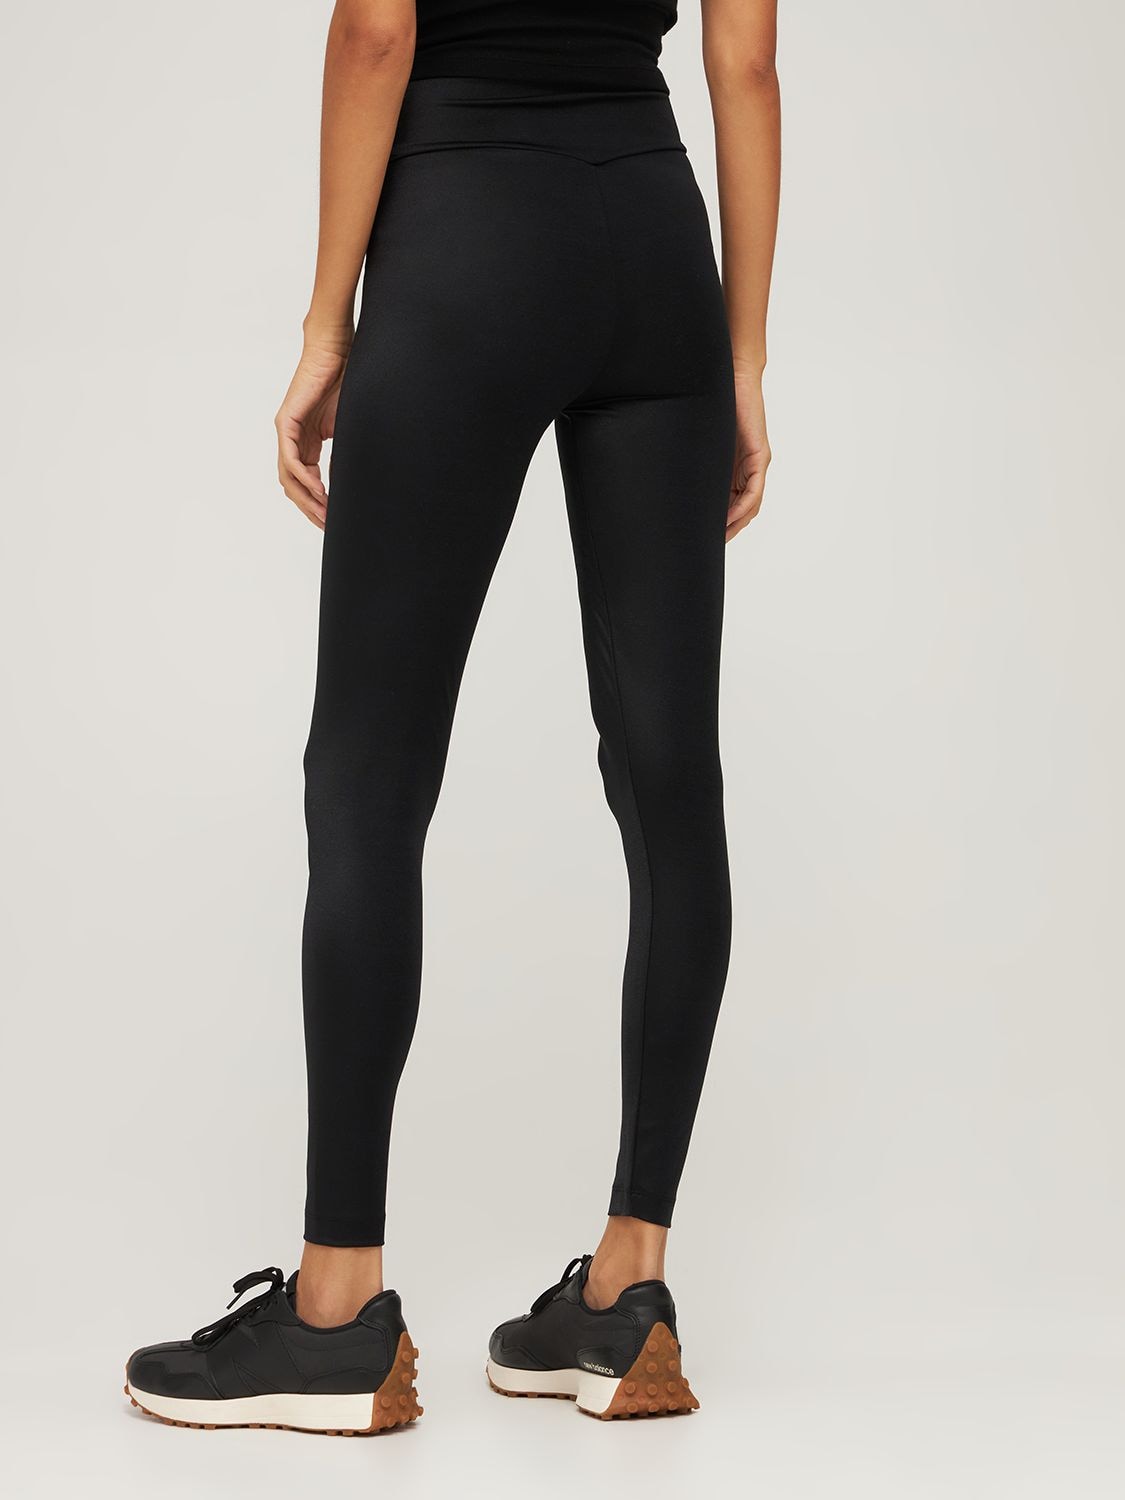 WOLFORD The Workout Stretch Nylon Legging